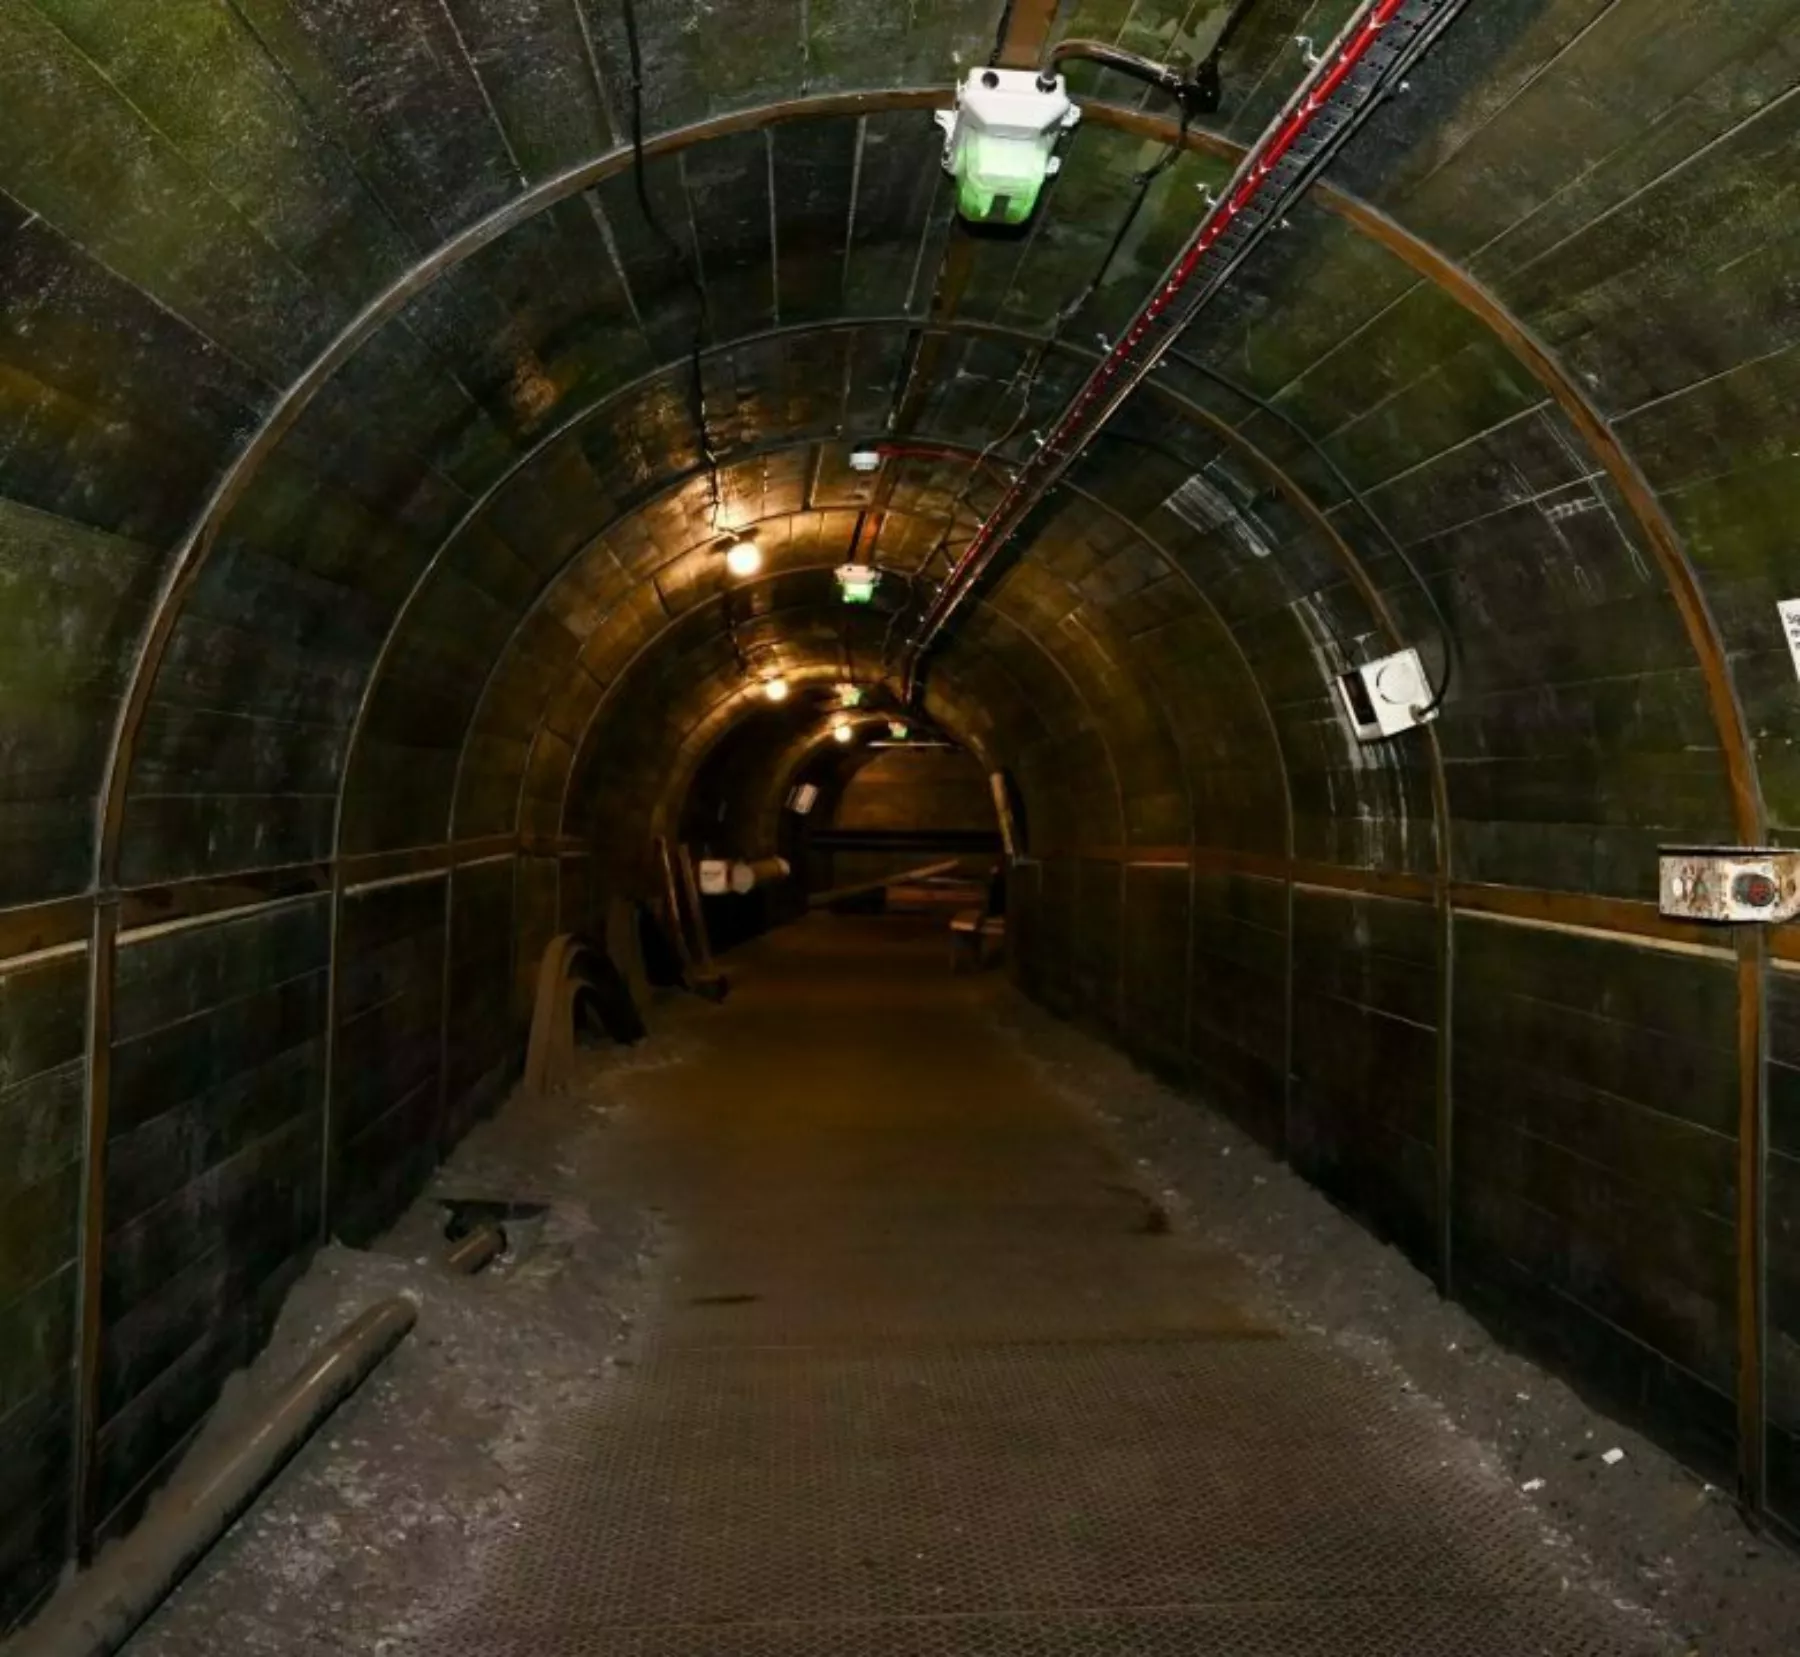 Photograph of empty and disused mine shaft with green tiles and lights on ceiling